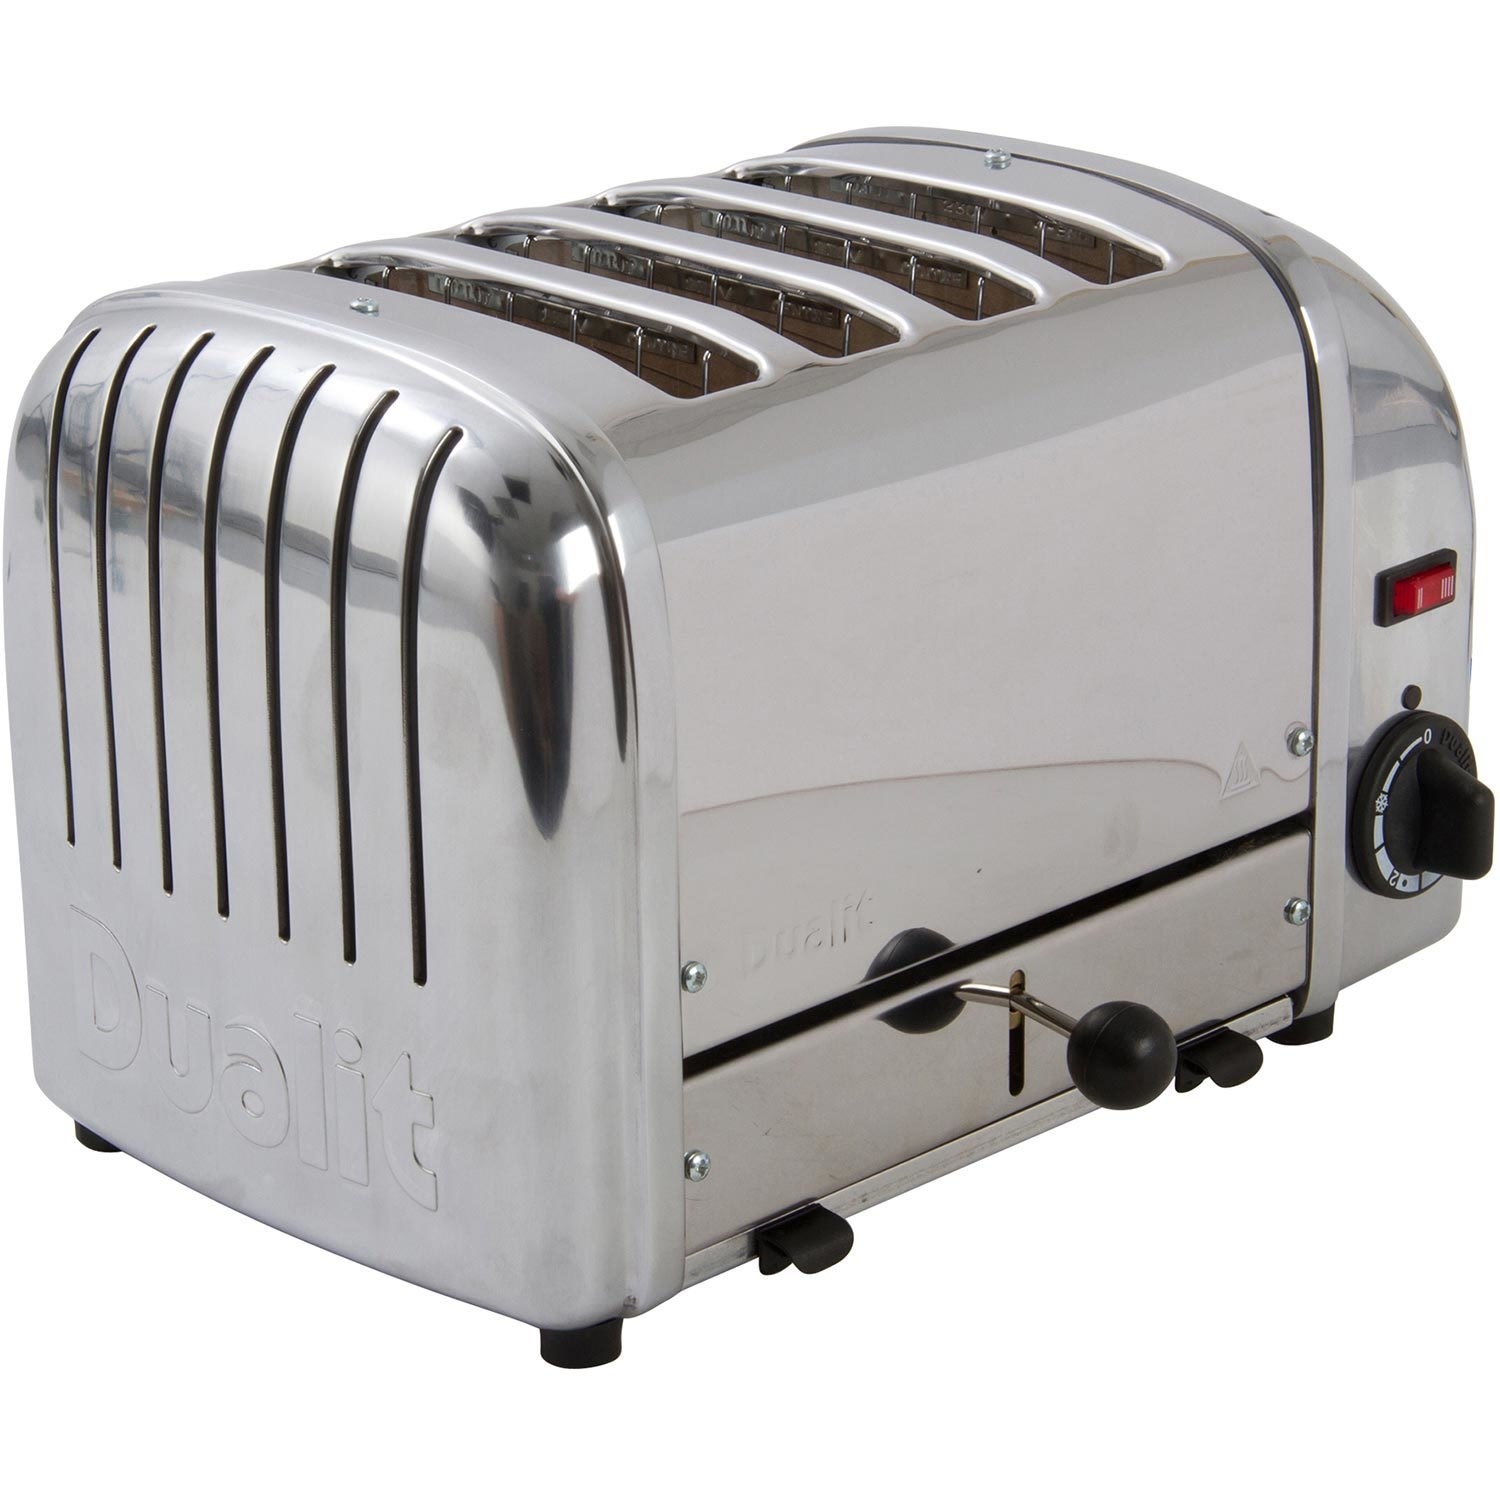 Dualit 40352 Classic 4 Slice Toaster - Stainless Steel DA0040